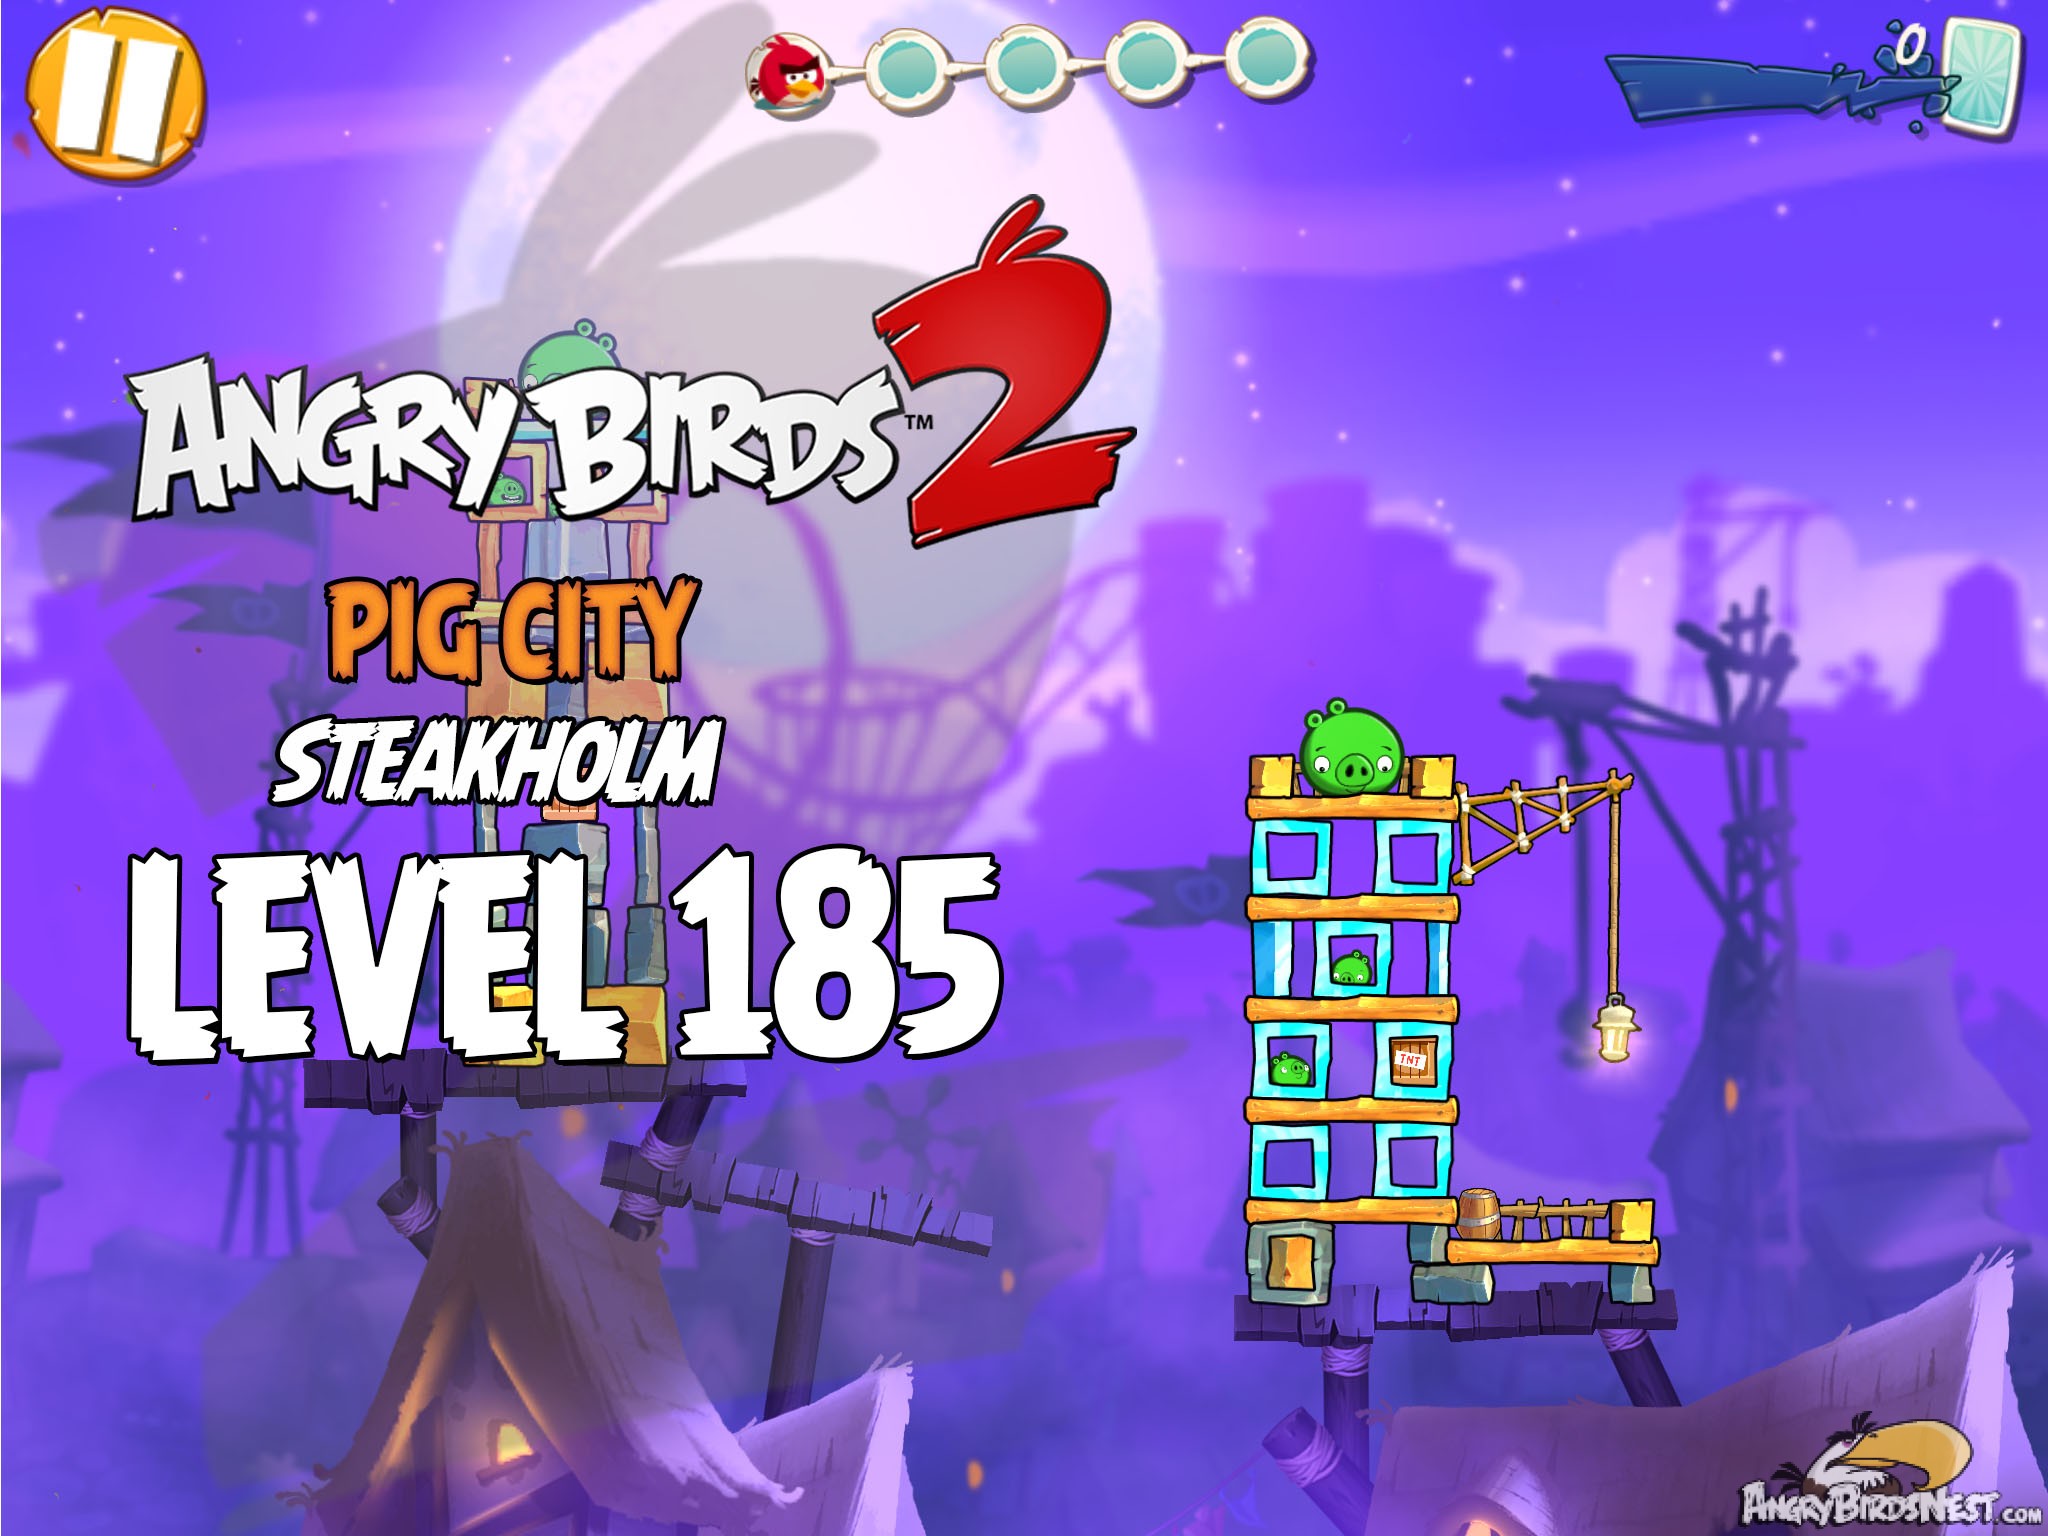 Angry Birds 2 Pig City Steakholm Level 185